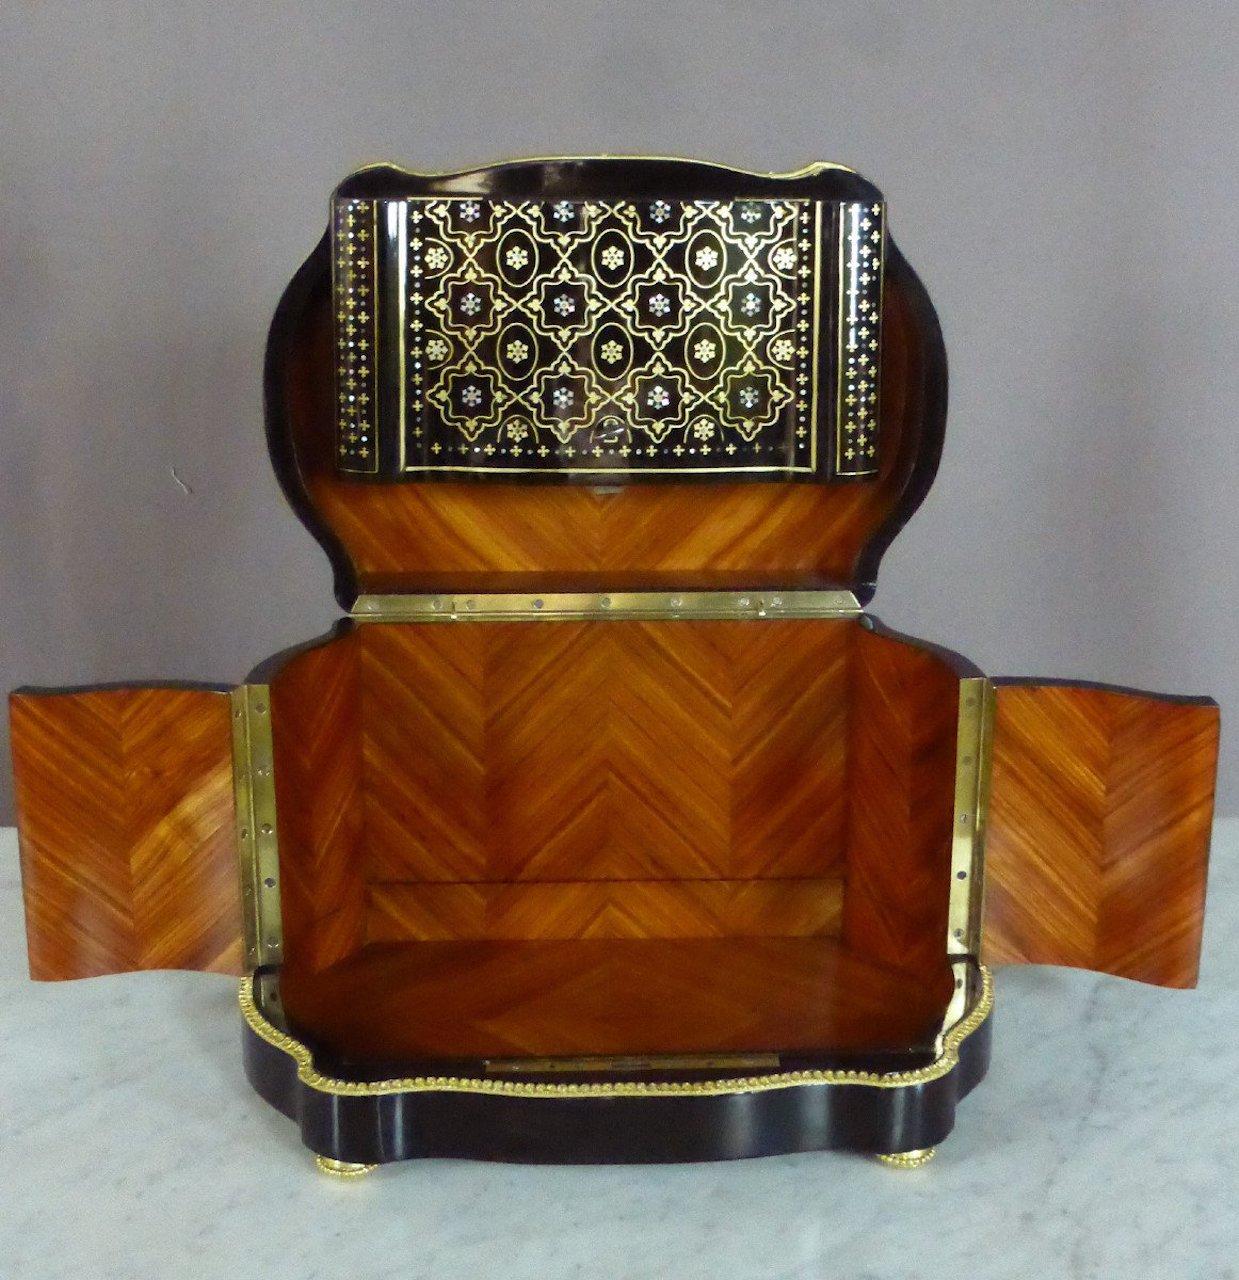 Napoleon III style liquor cabinet in blackened wood and mother-of-pearl inlays and rosewood interior.
Pad-varnished oval box.
It is garnished with its liquor servant consisting of four decanters and sixteen decorated glasses (including 5 slightly